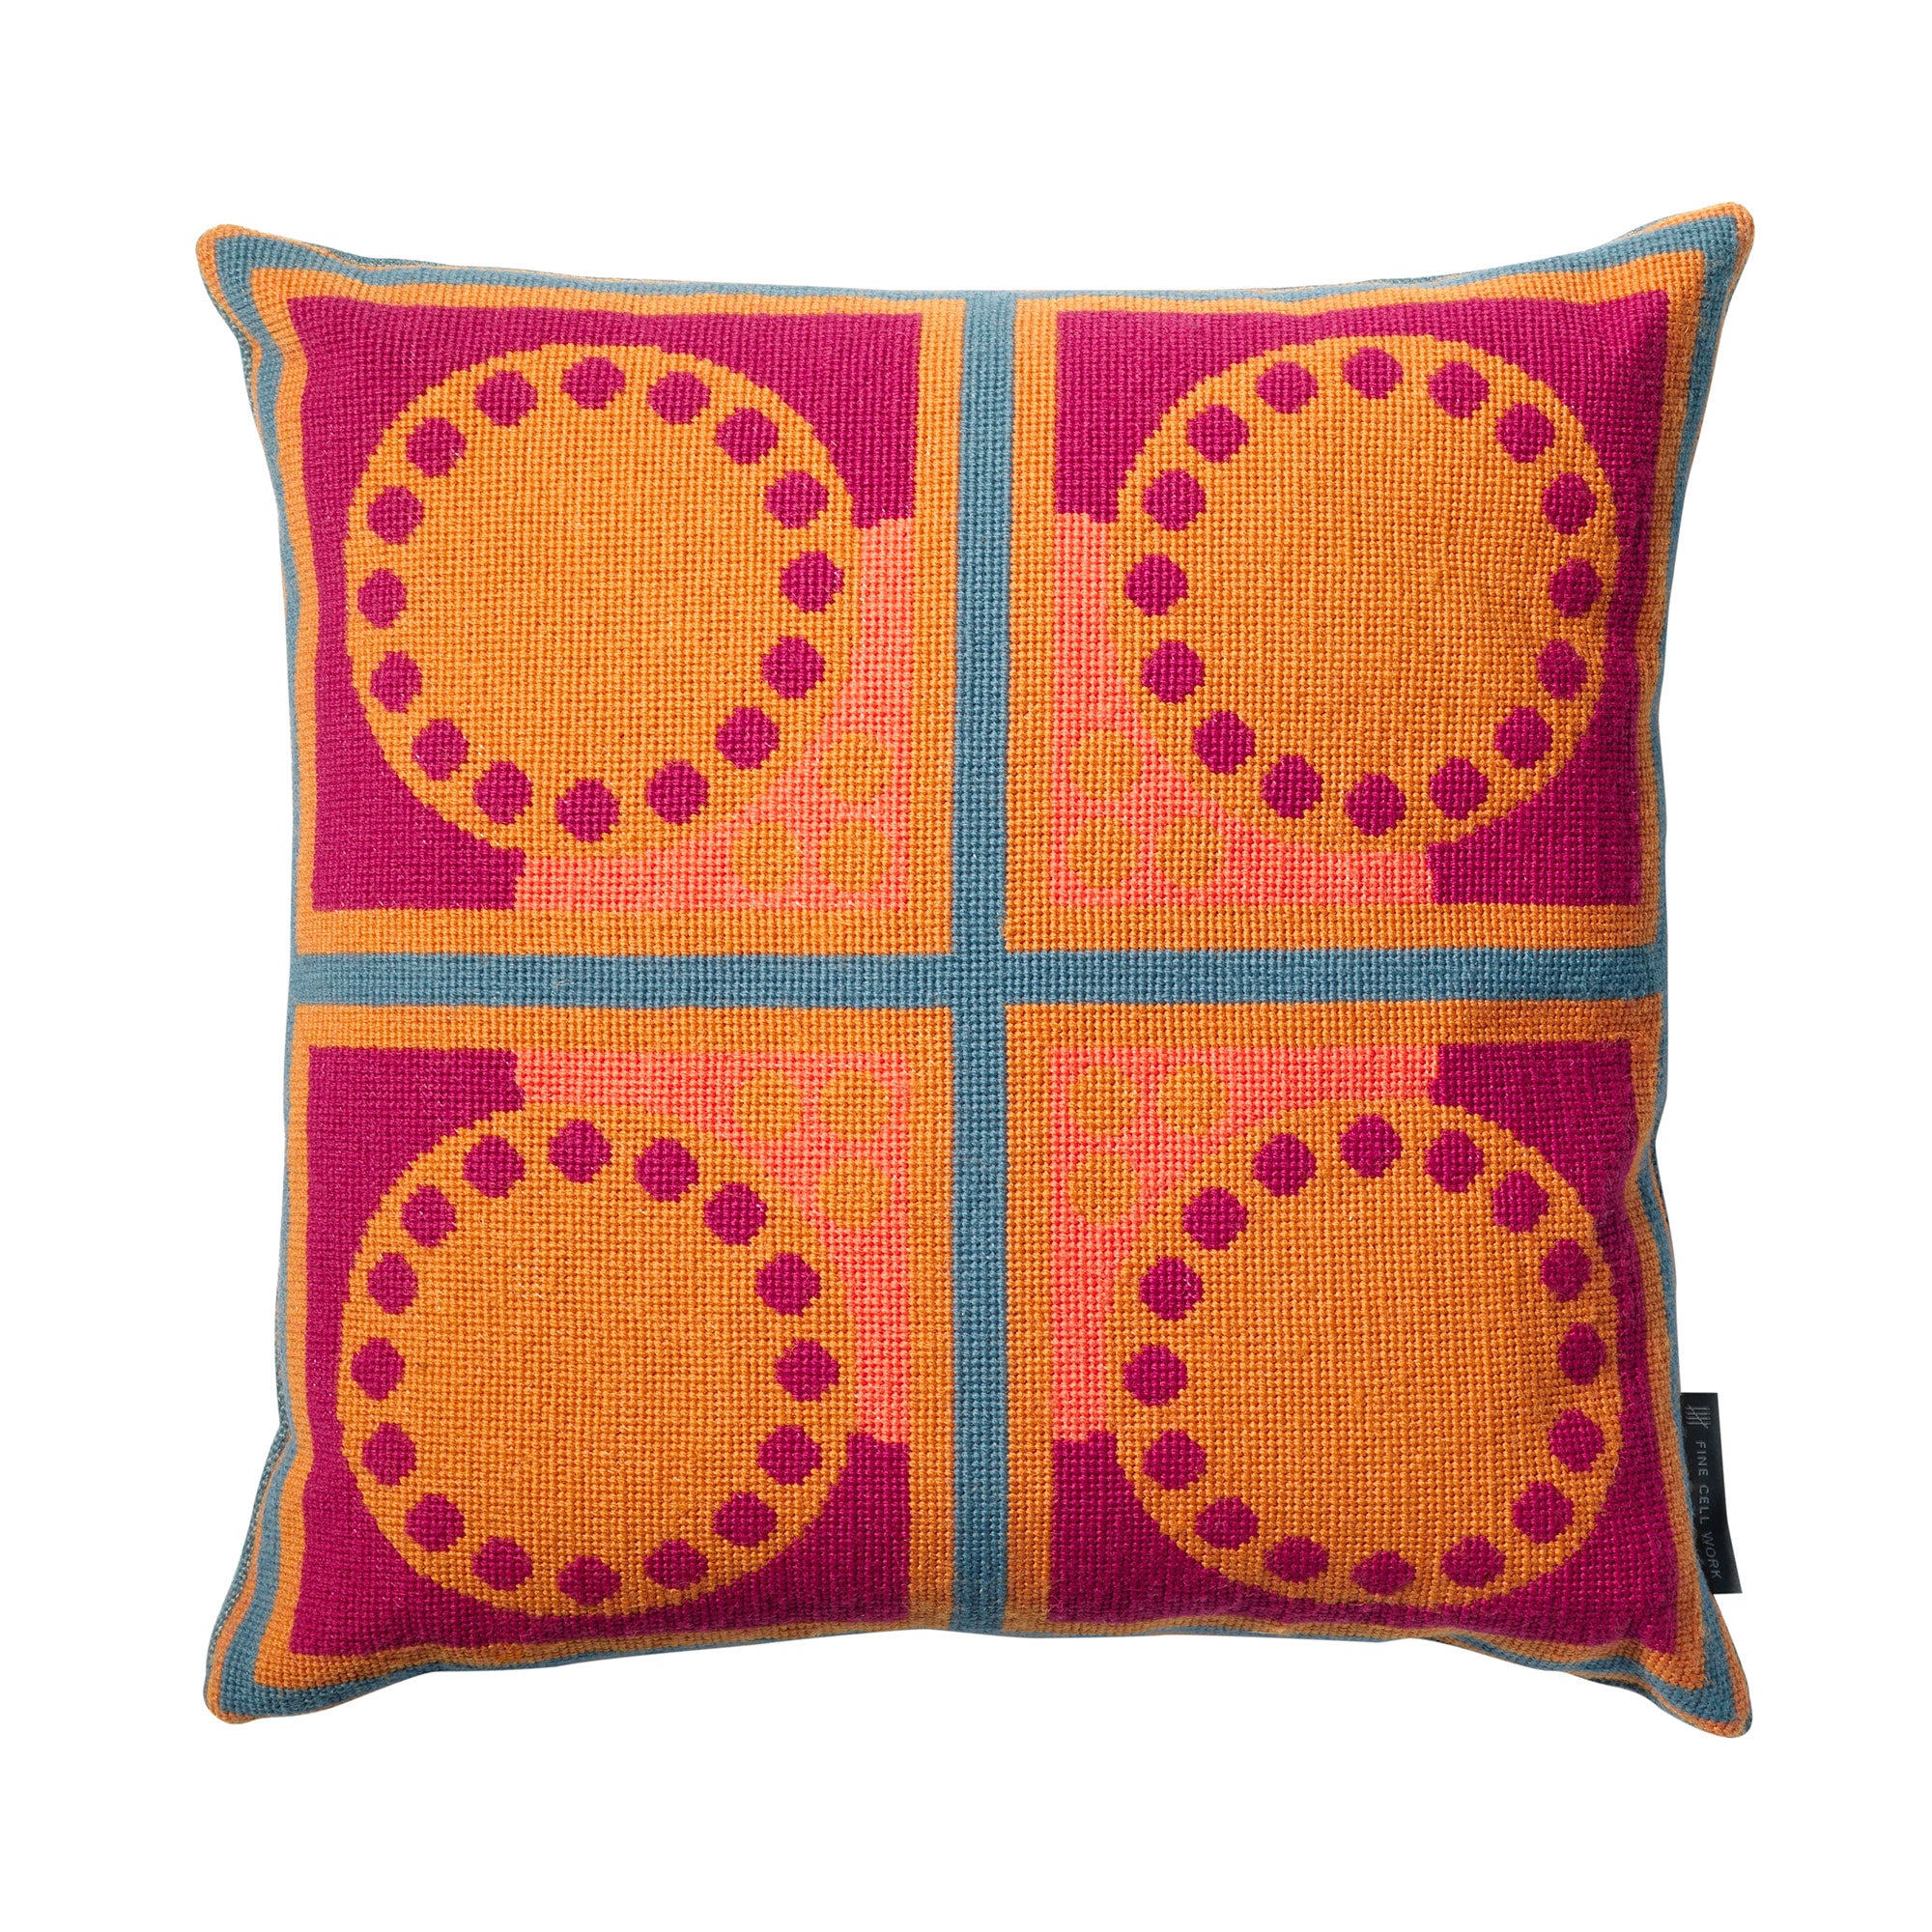 Cressida Bell Granadilla Needlepoint Cushion Orange and Pink featured George Clarke's Old House New Home